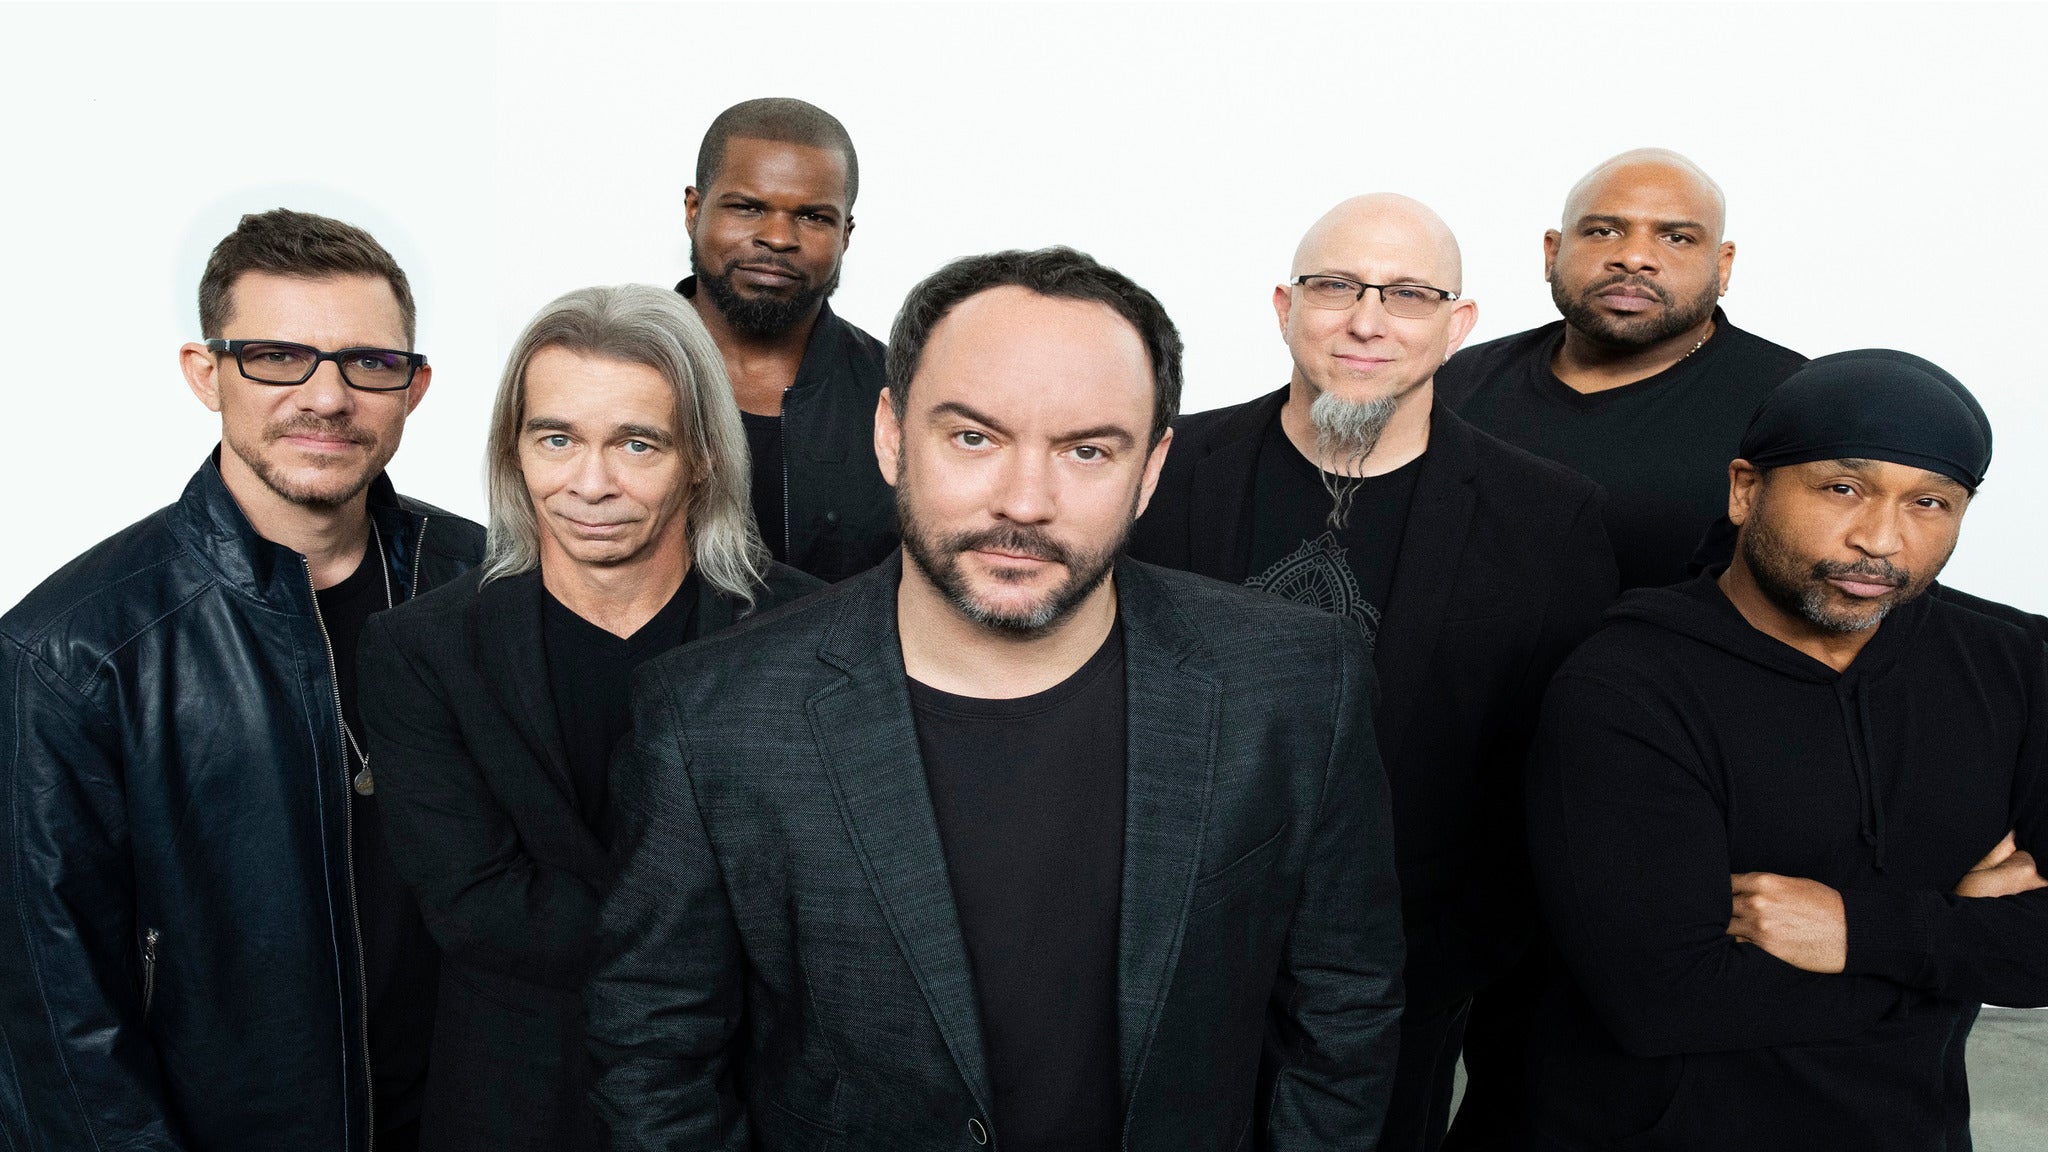 Dave Matthews Band pre-sale passcode for early tickets in Cuyahoga Falls